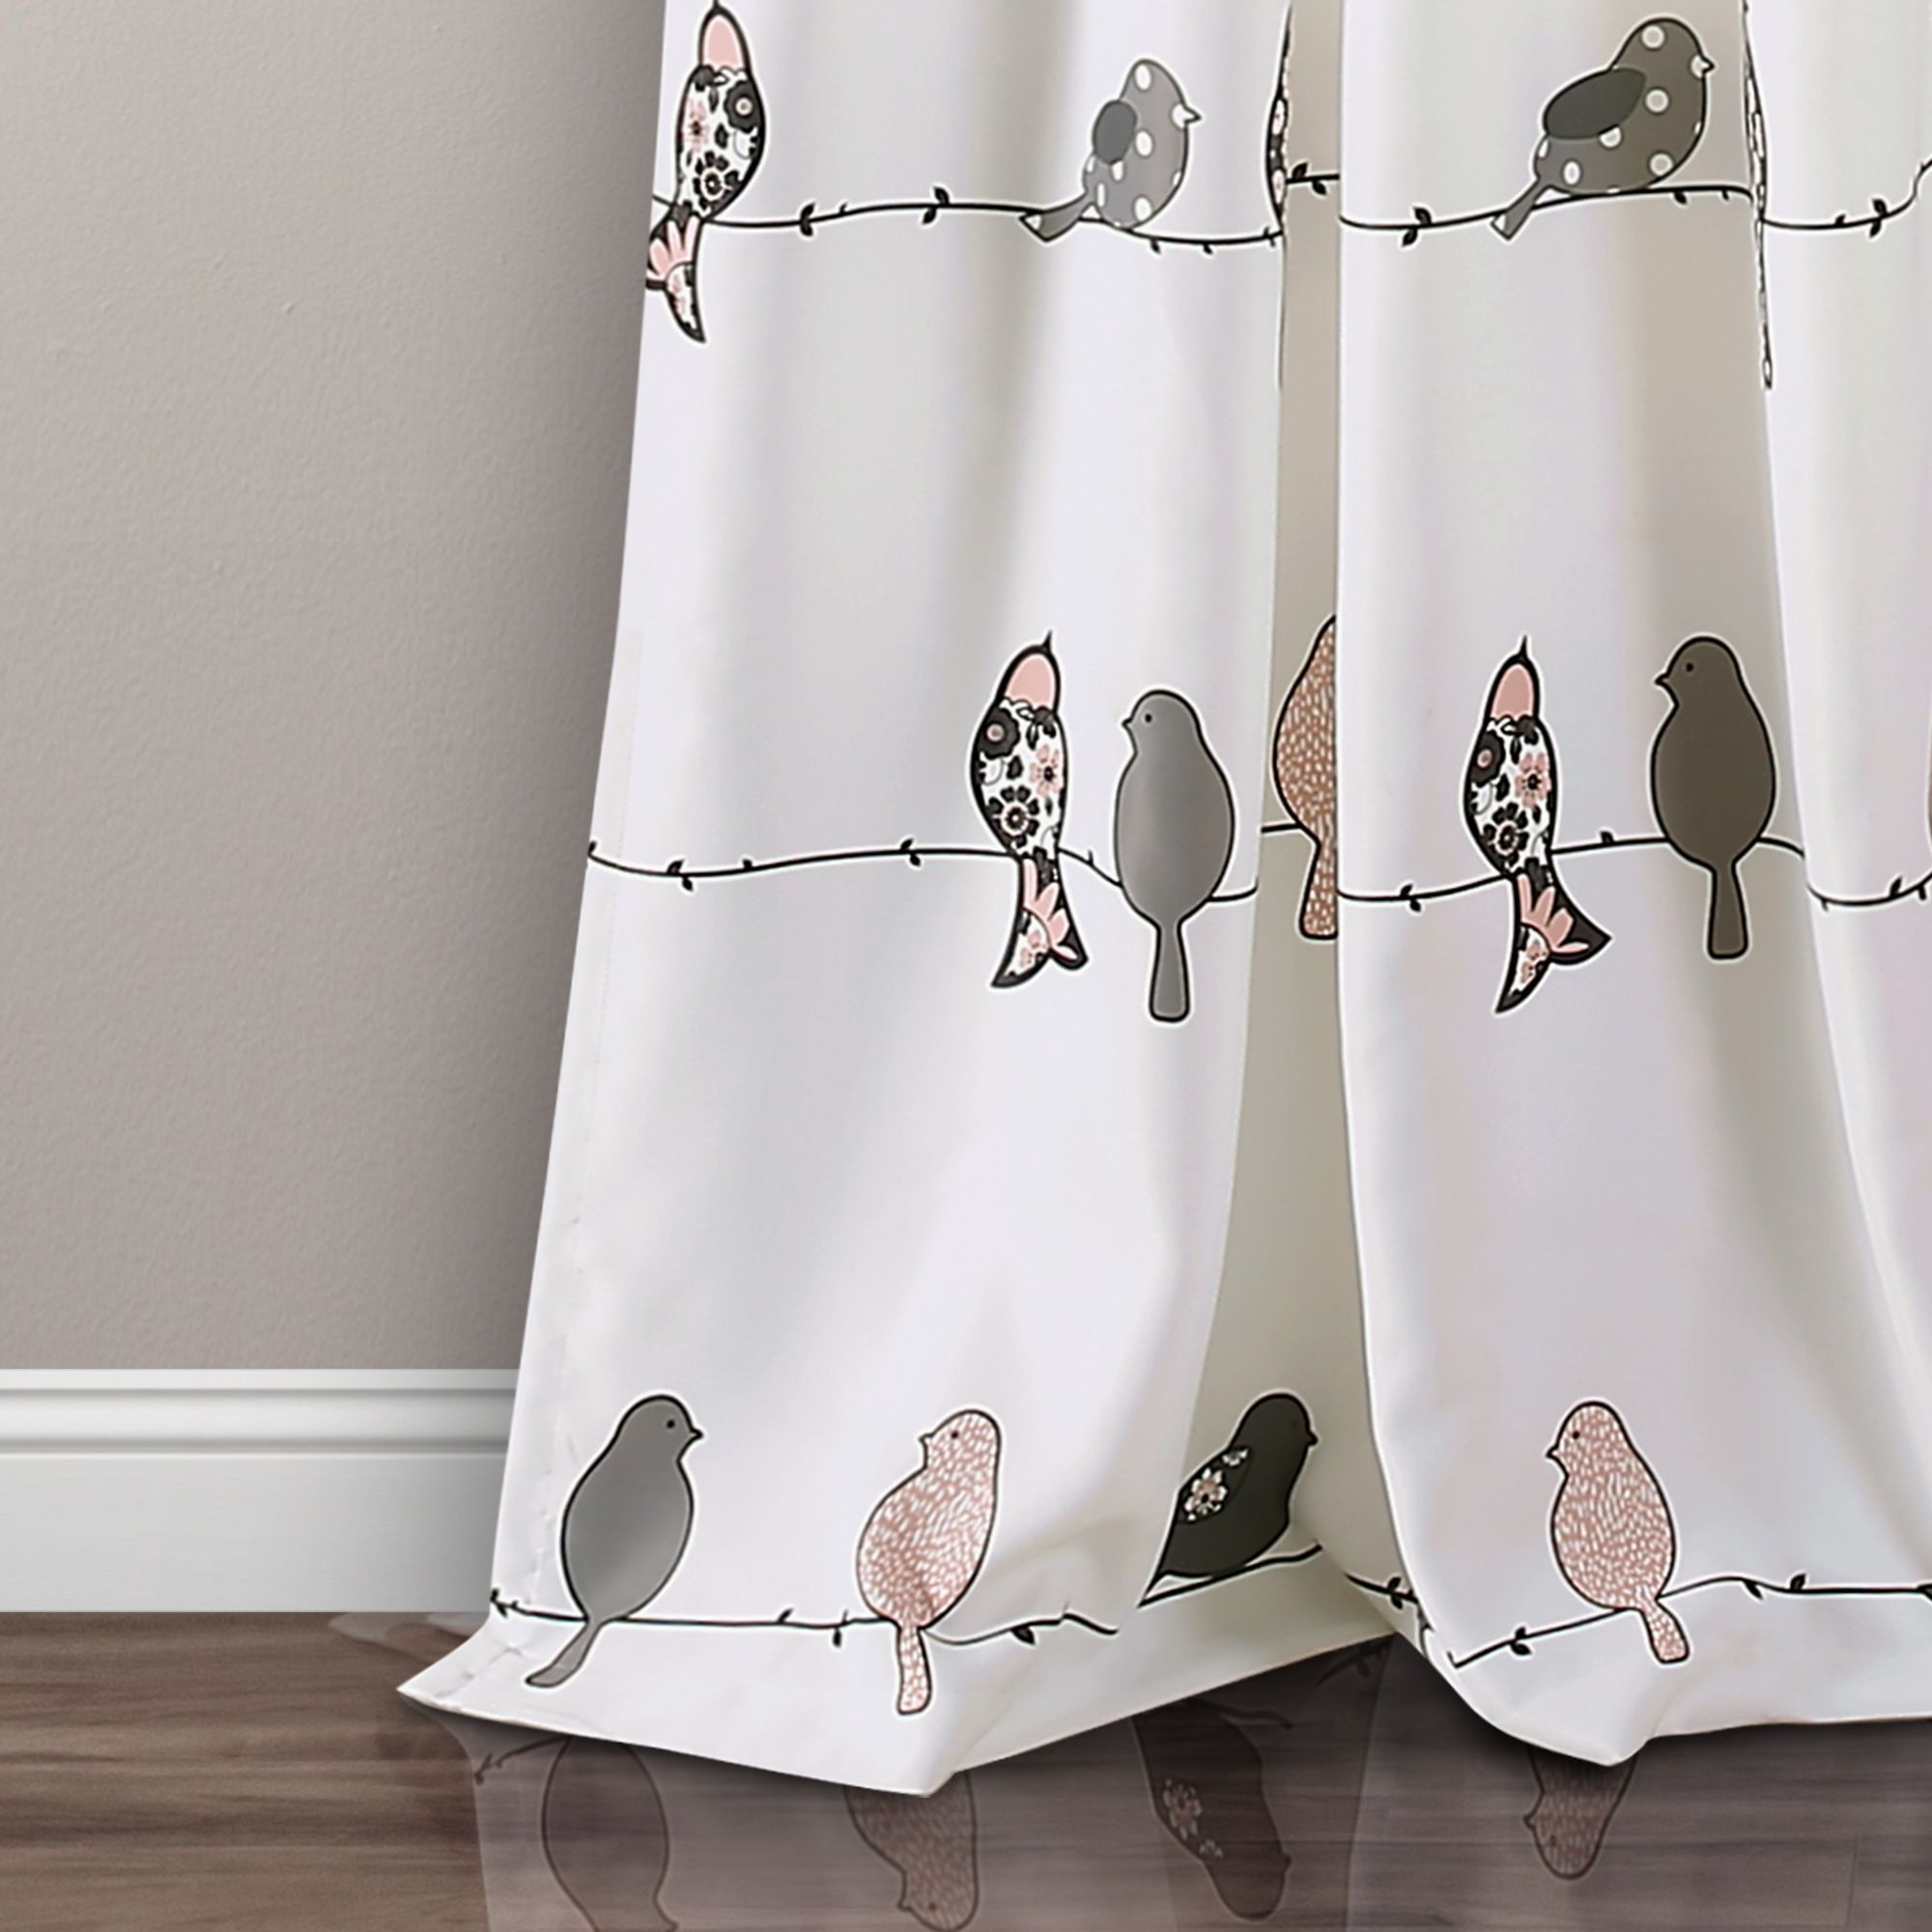 [%rowley Birds Window Curtain Set. 50% Off 2pc Set Plus Free Pertaining To Most Recently Released Rowley Birds Valances|rowley Birds Valances Regarding Favorite Rowley Birds Window Curtain Set. 50% Off 2pc Set Plus Free|well Known Rowley Birds Valances Within Rowley Birds Window Curtain Set. 50% Off 2pc Set Plus Free|best And Newest Rowley Birds Window Curtain Set (View 19 of 20)